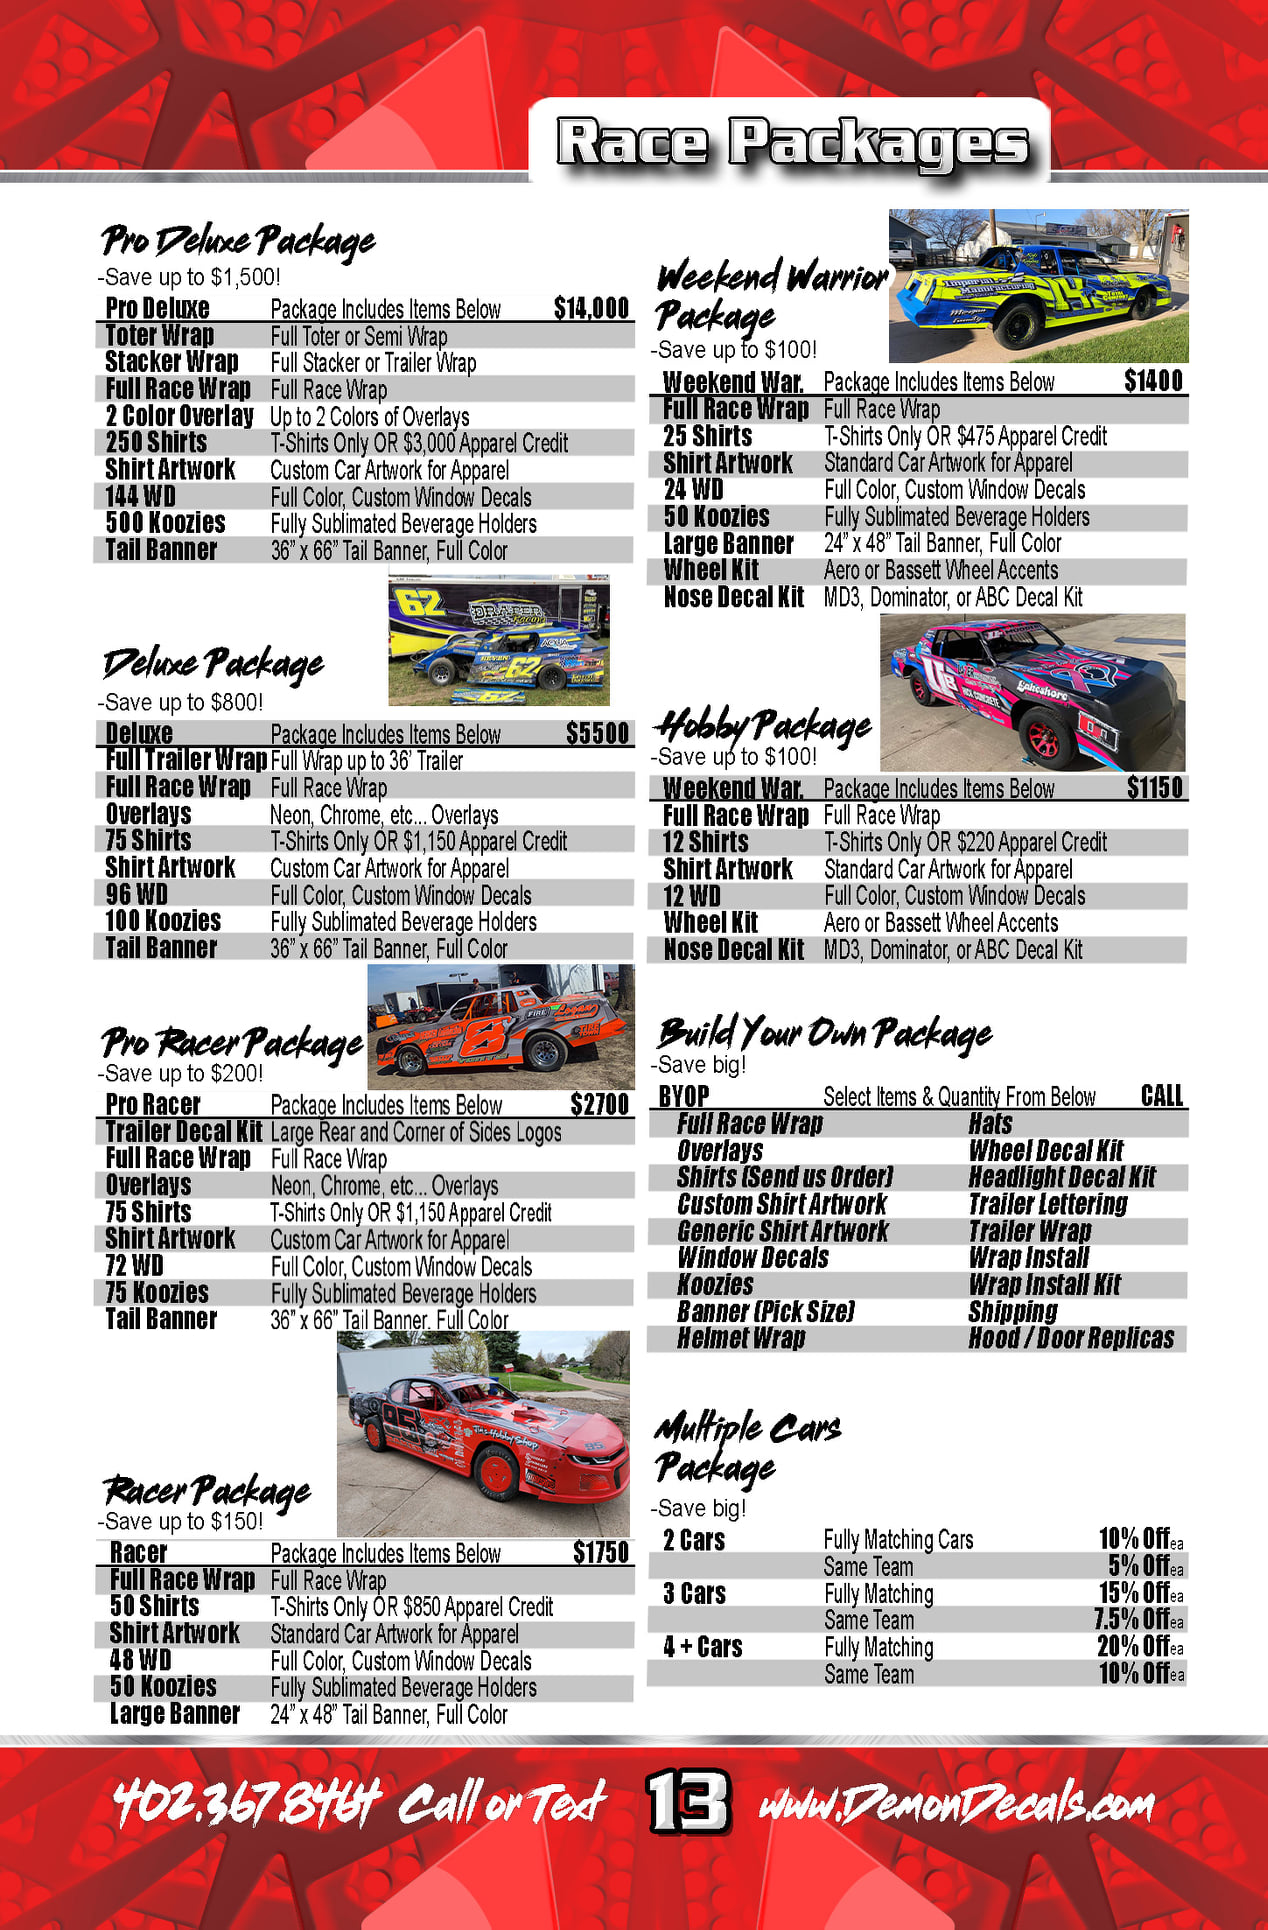 Demon Decals 2022 Catalog - Race Packages